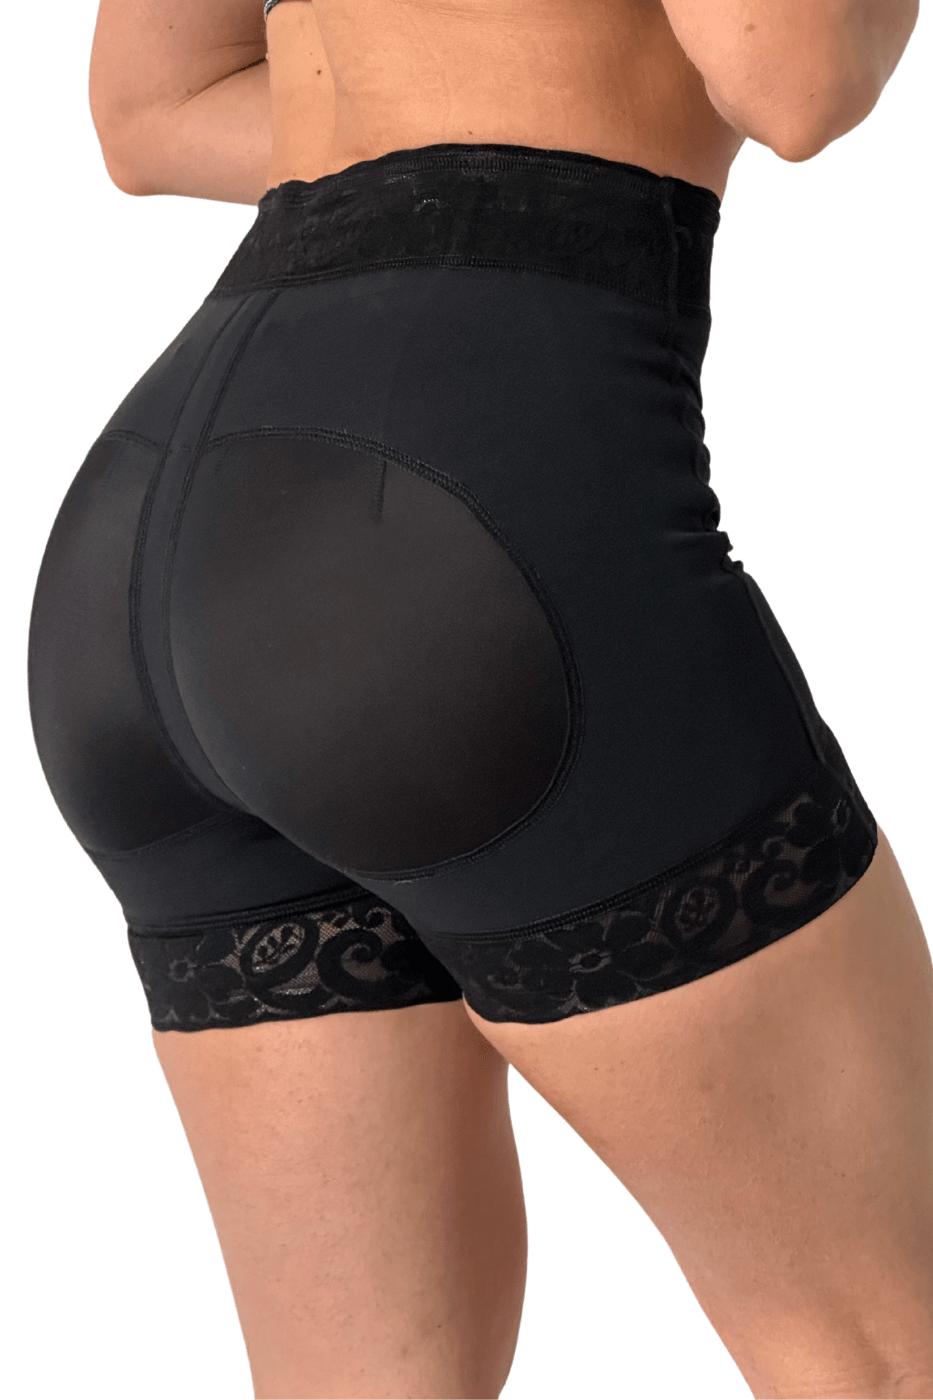 Curveez second skin compression shorts for women